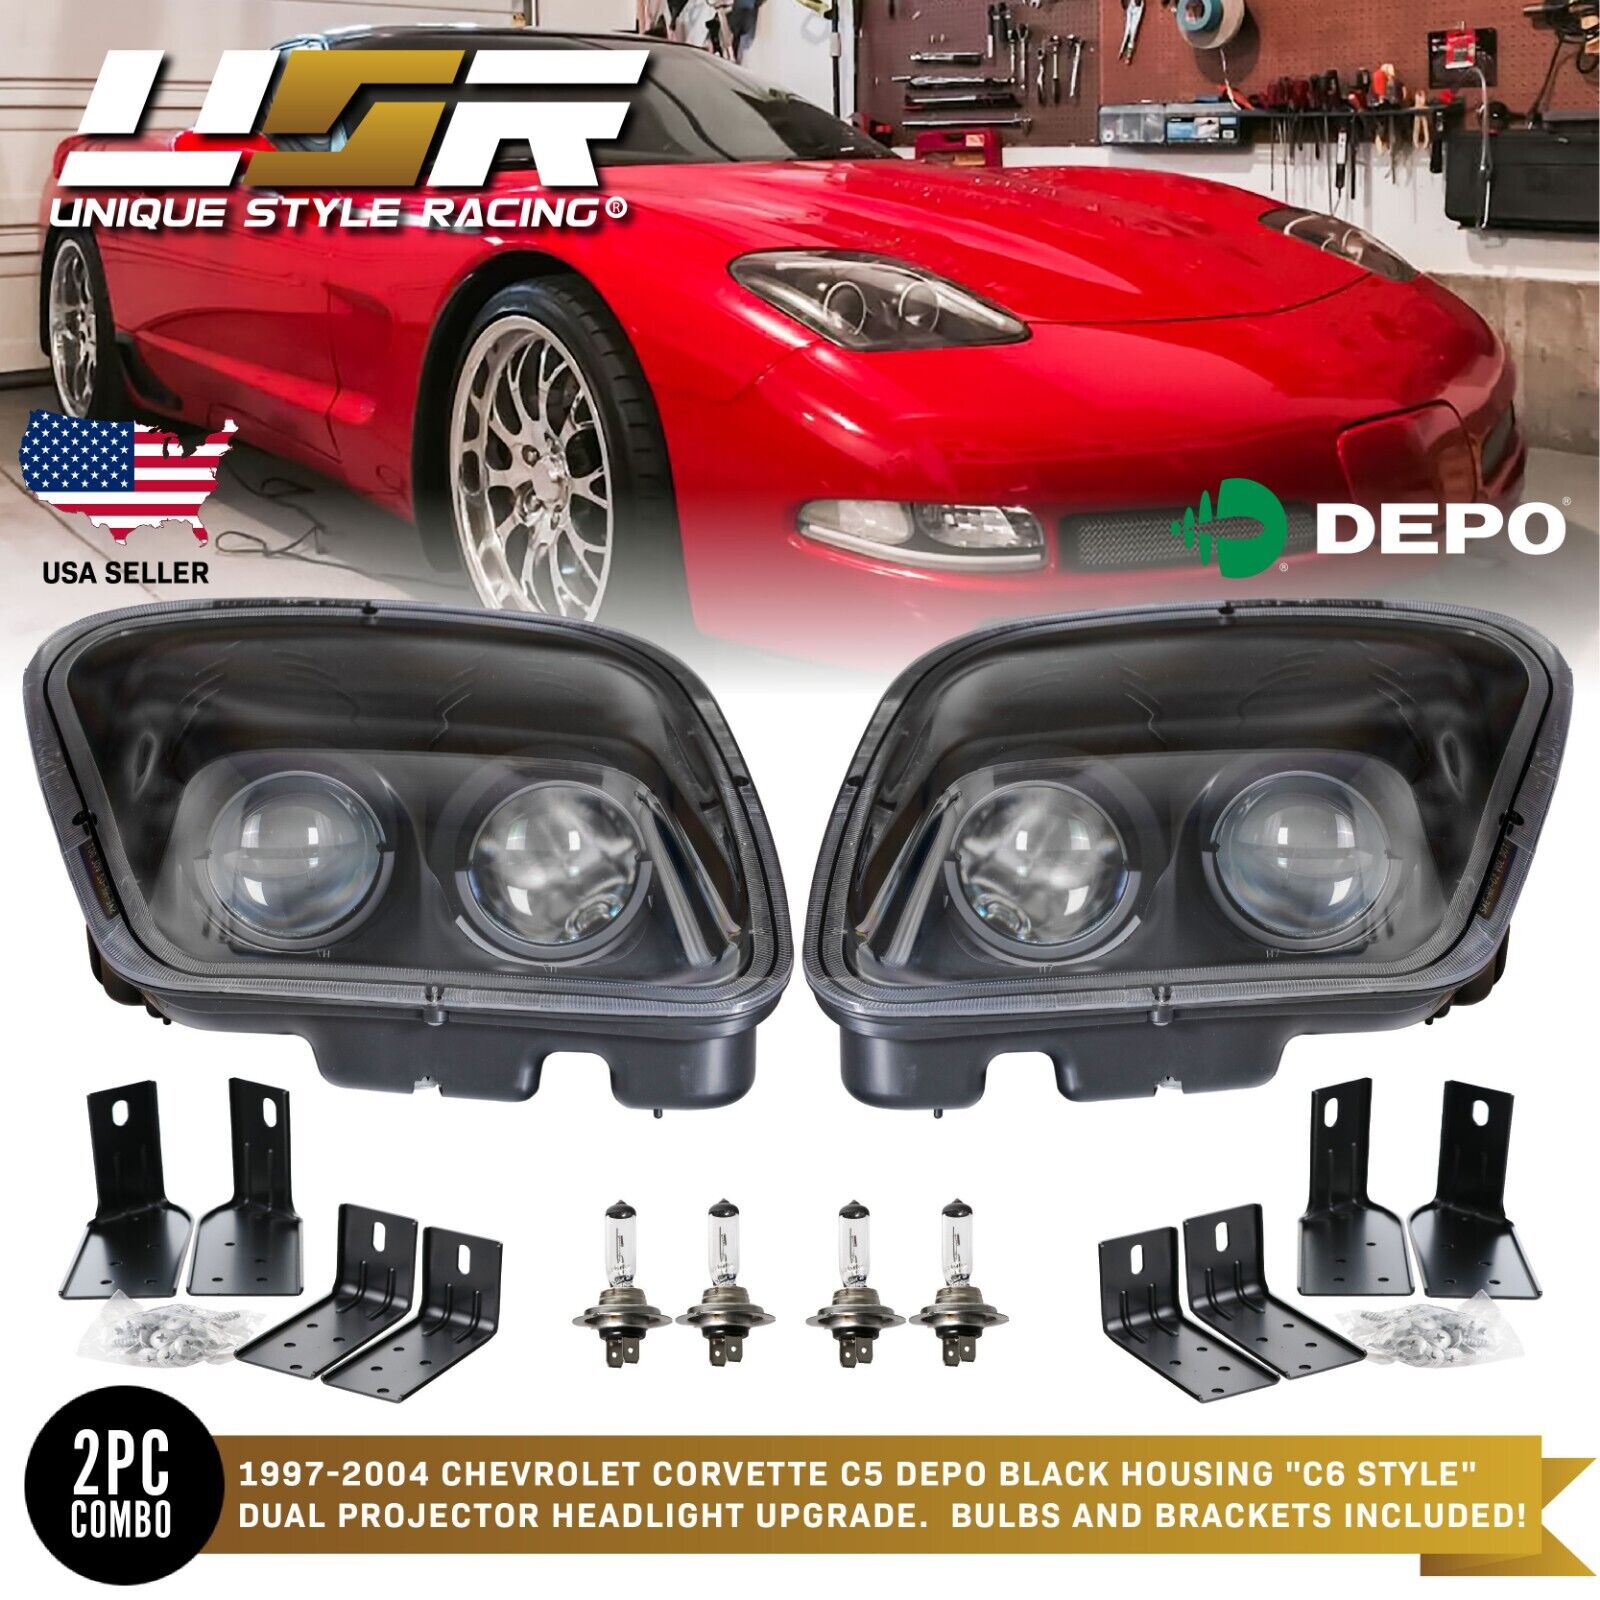 DEPO Black / Clear Projector Headlights For 97 98 99 00 01-04 Chevy Corvette C5